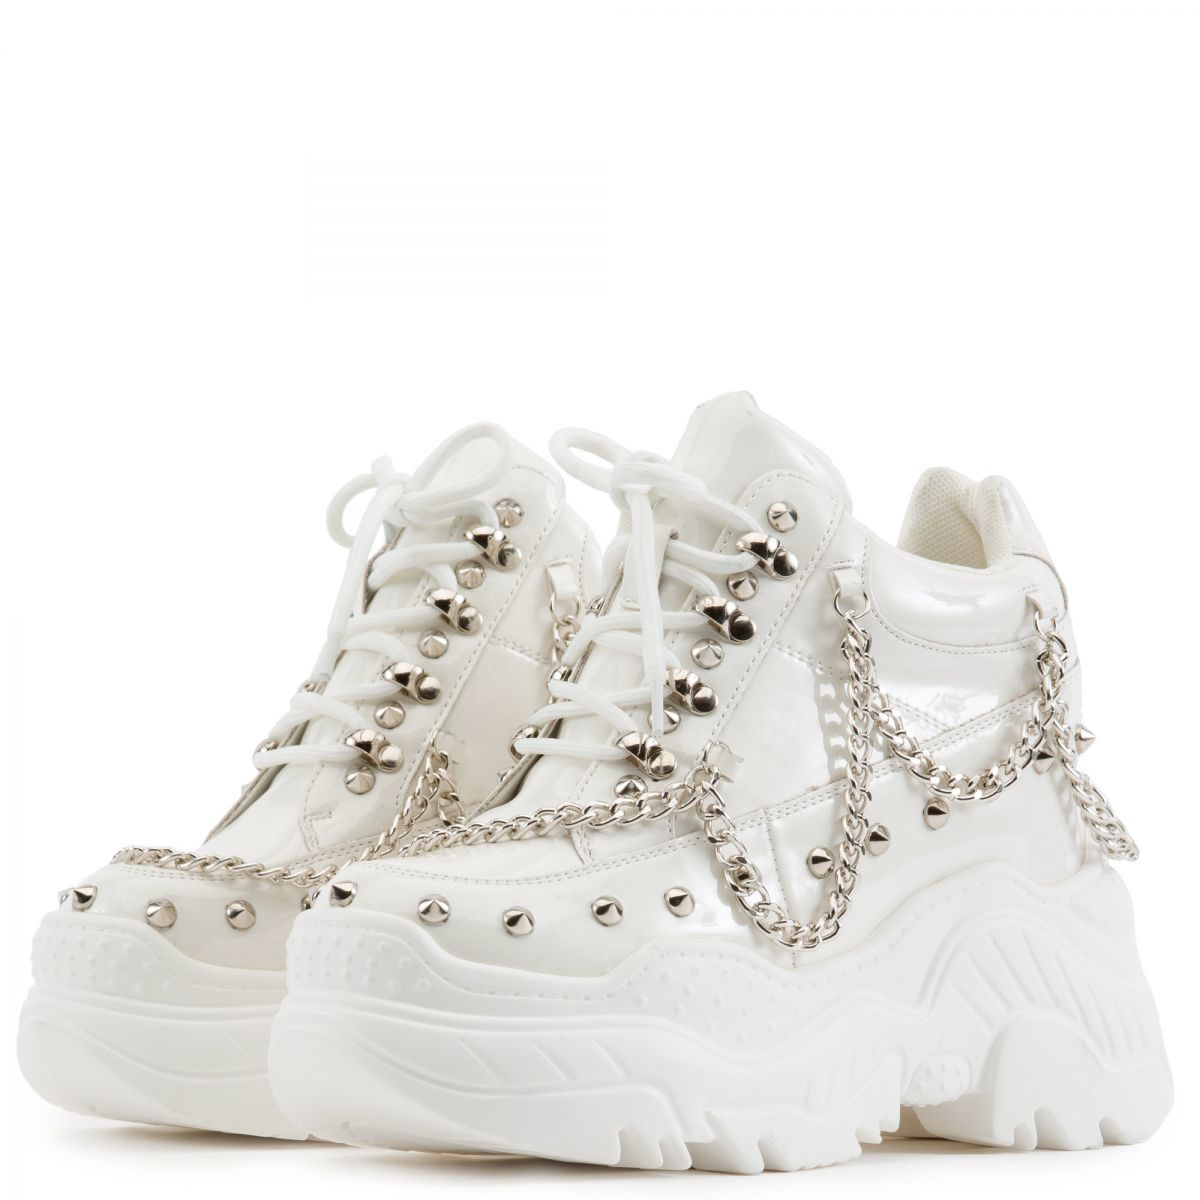 Anthony Wang Space Candy Platform Sneakers with Studs Black Patent